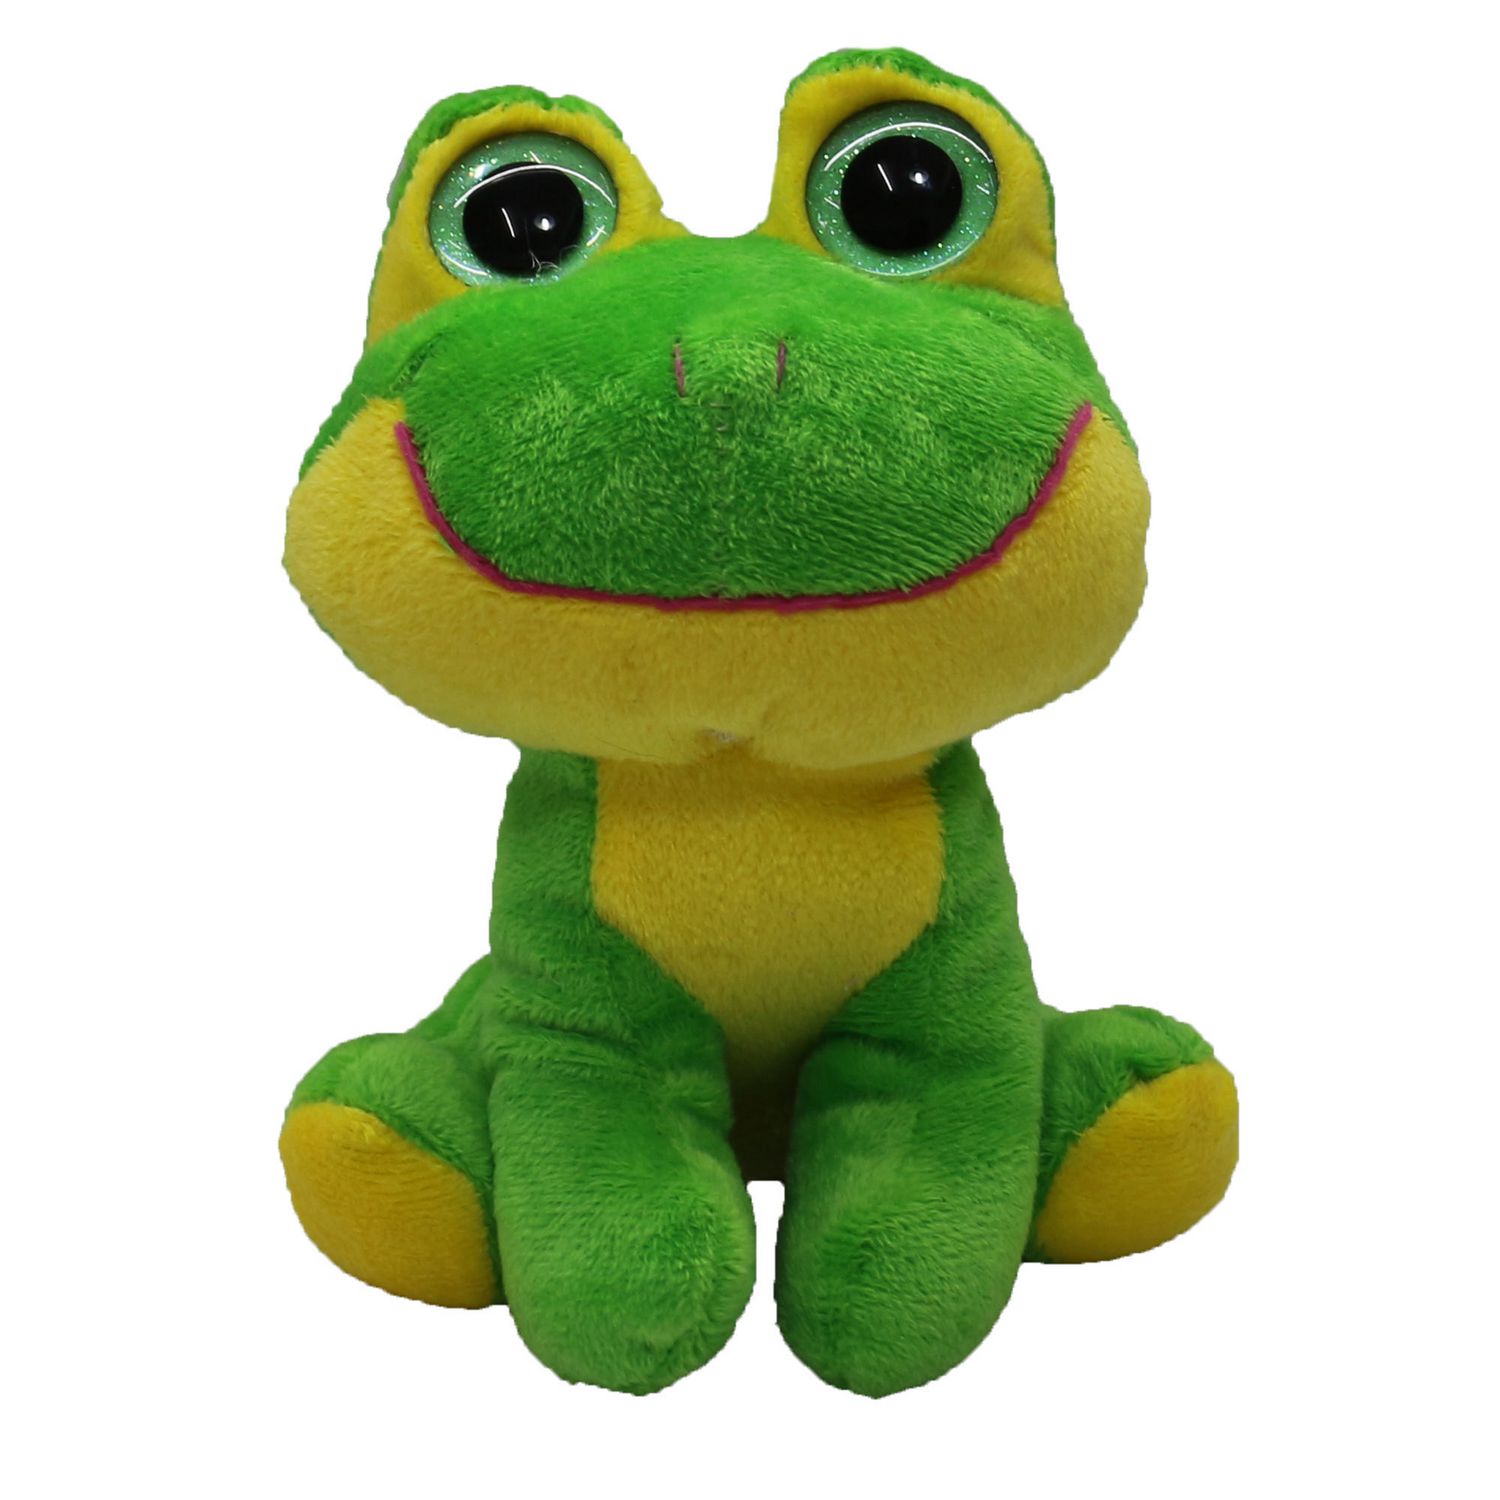 Best Made Toys Sitting Frog Plush Toy 